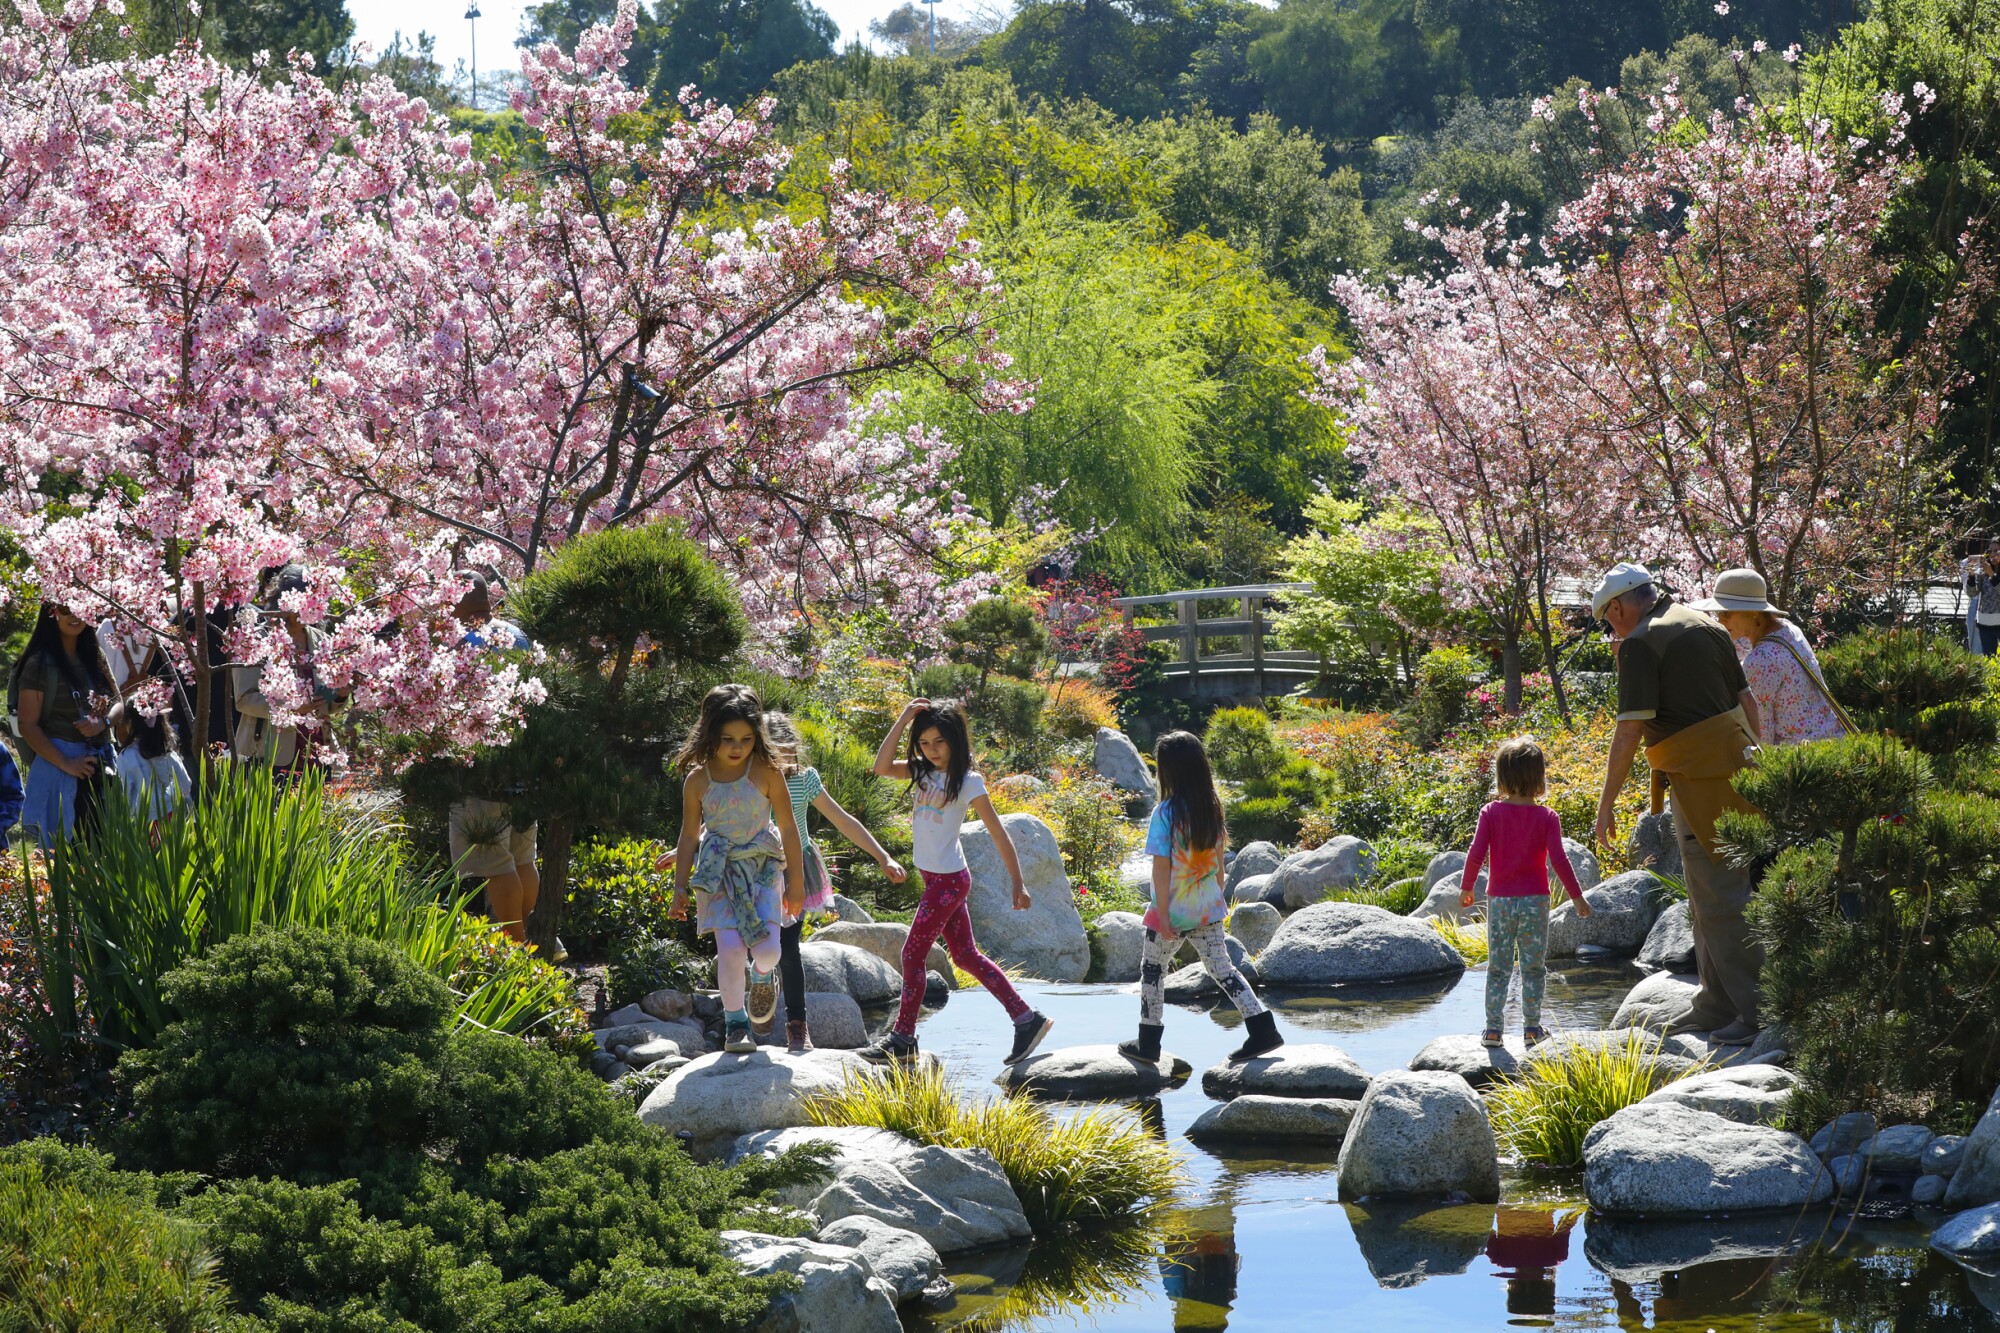 The Japanese Friendship Garden in Balboa Park hosted its annual three day Cherry Blossom Festival.